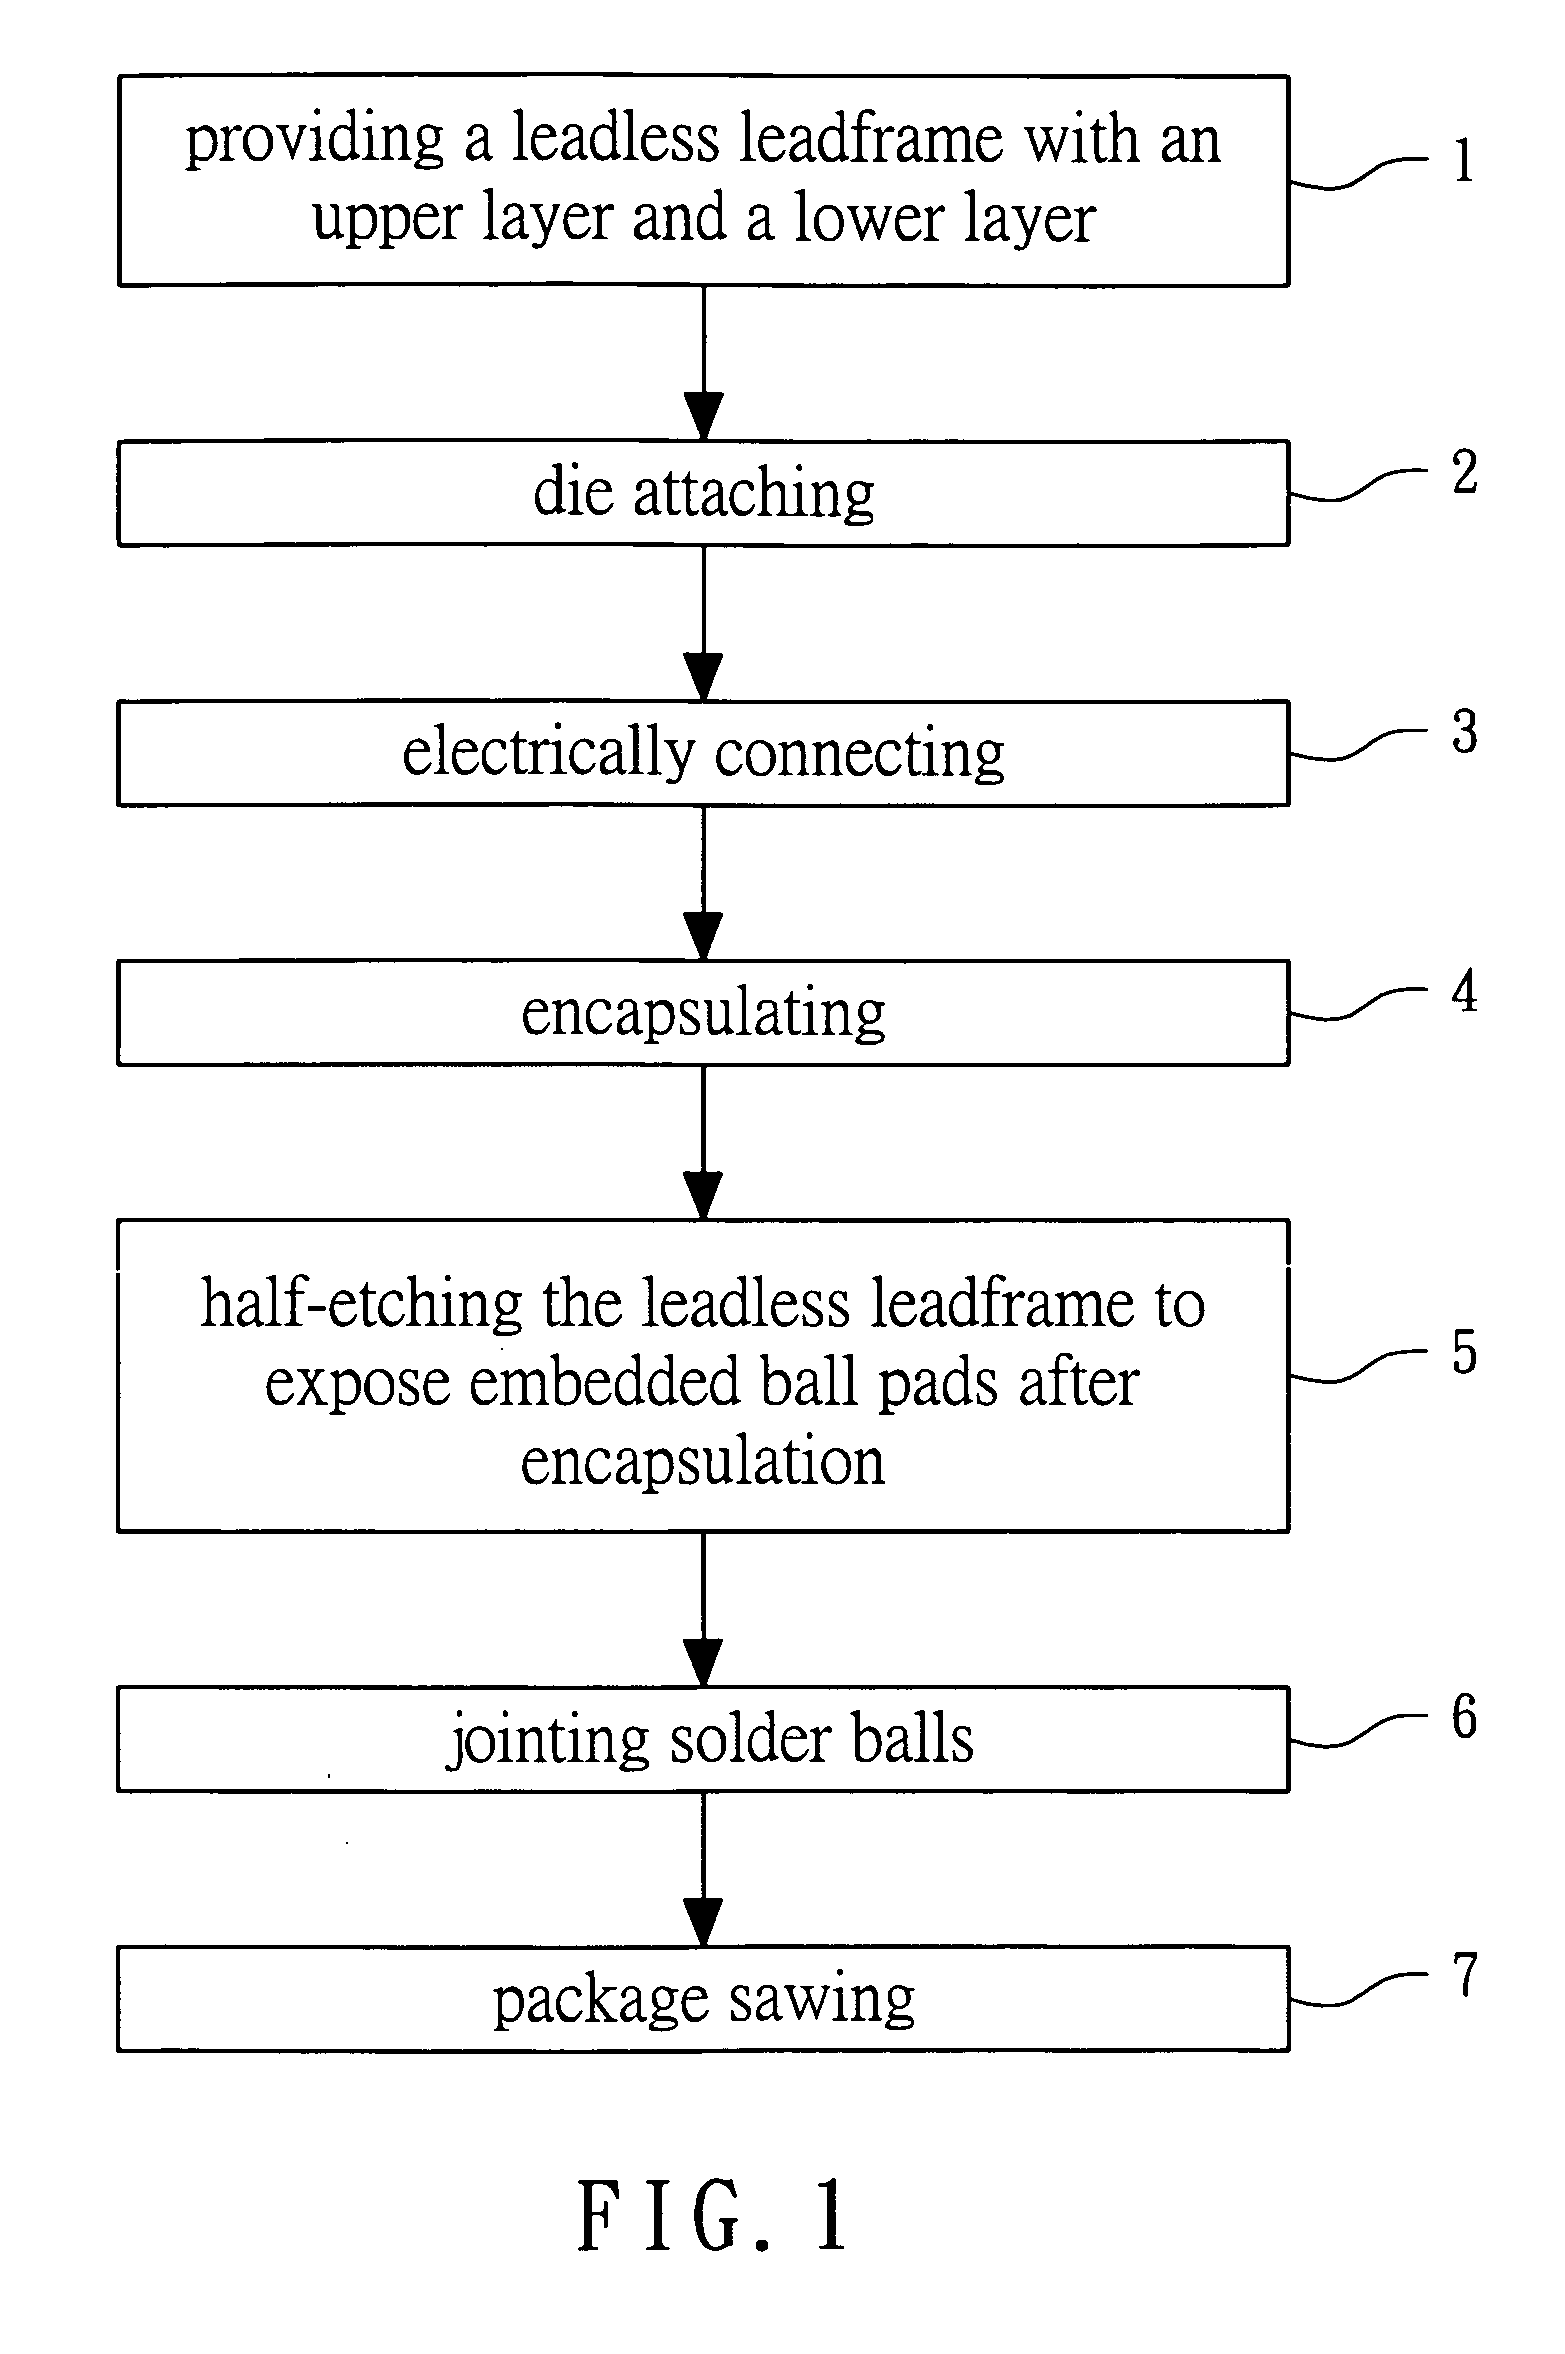 Manufacturing process of leadframe-based BGA packages